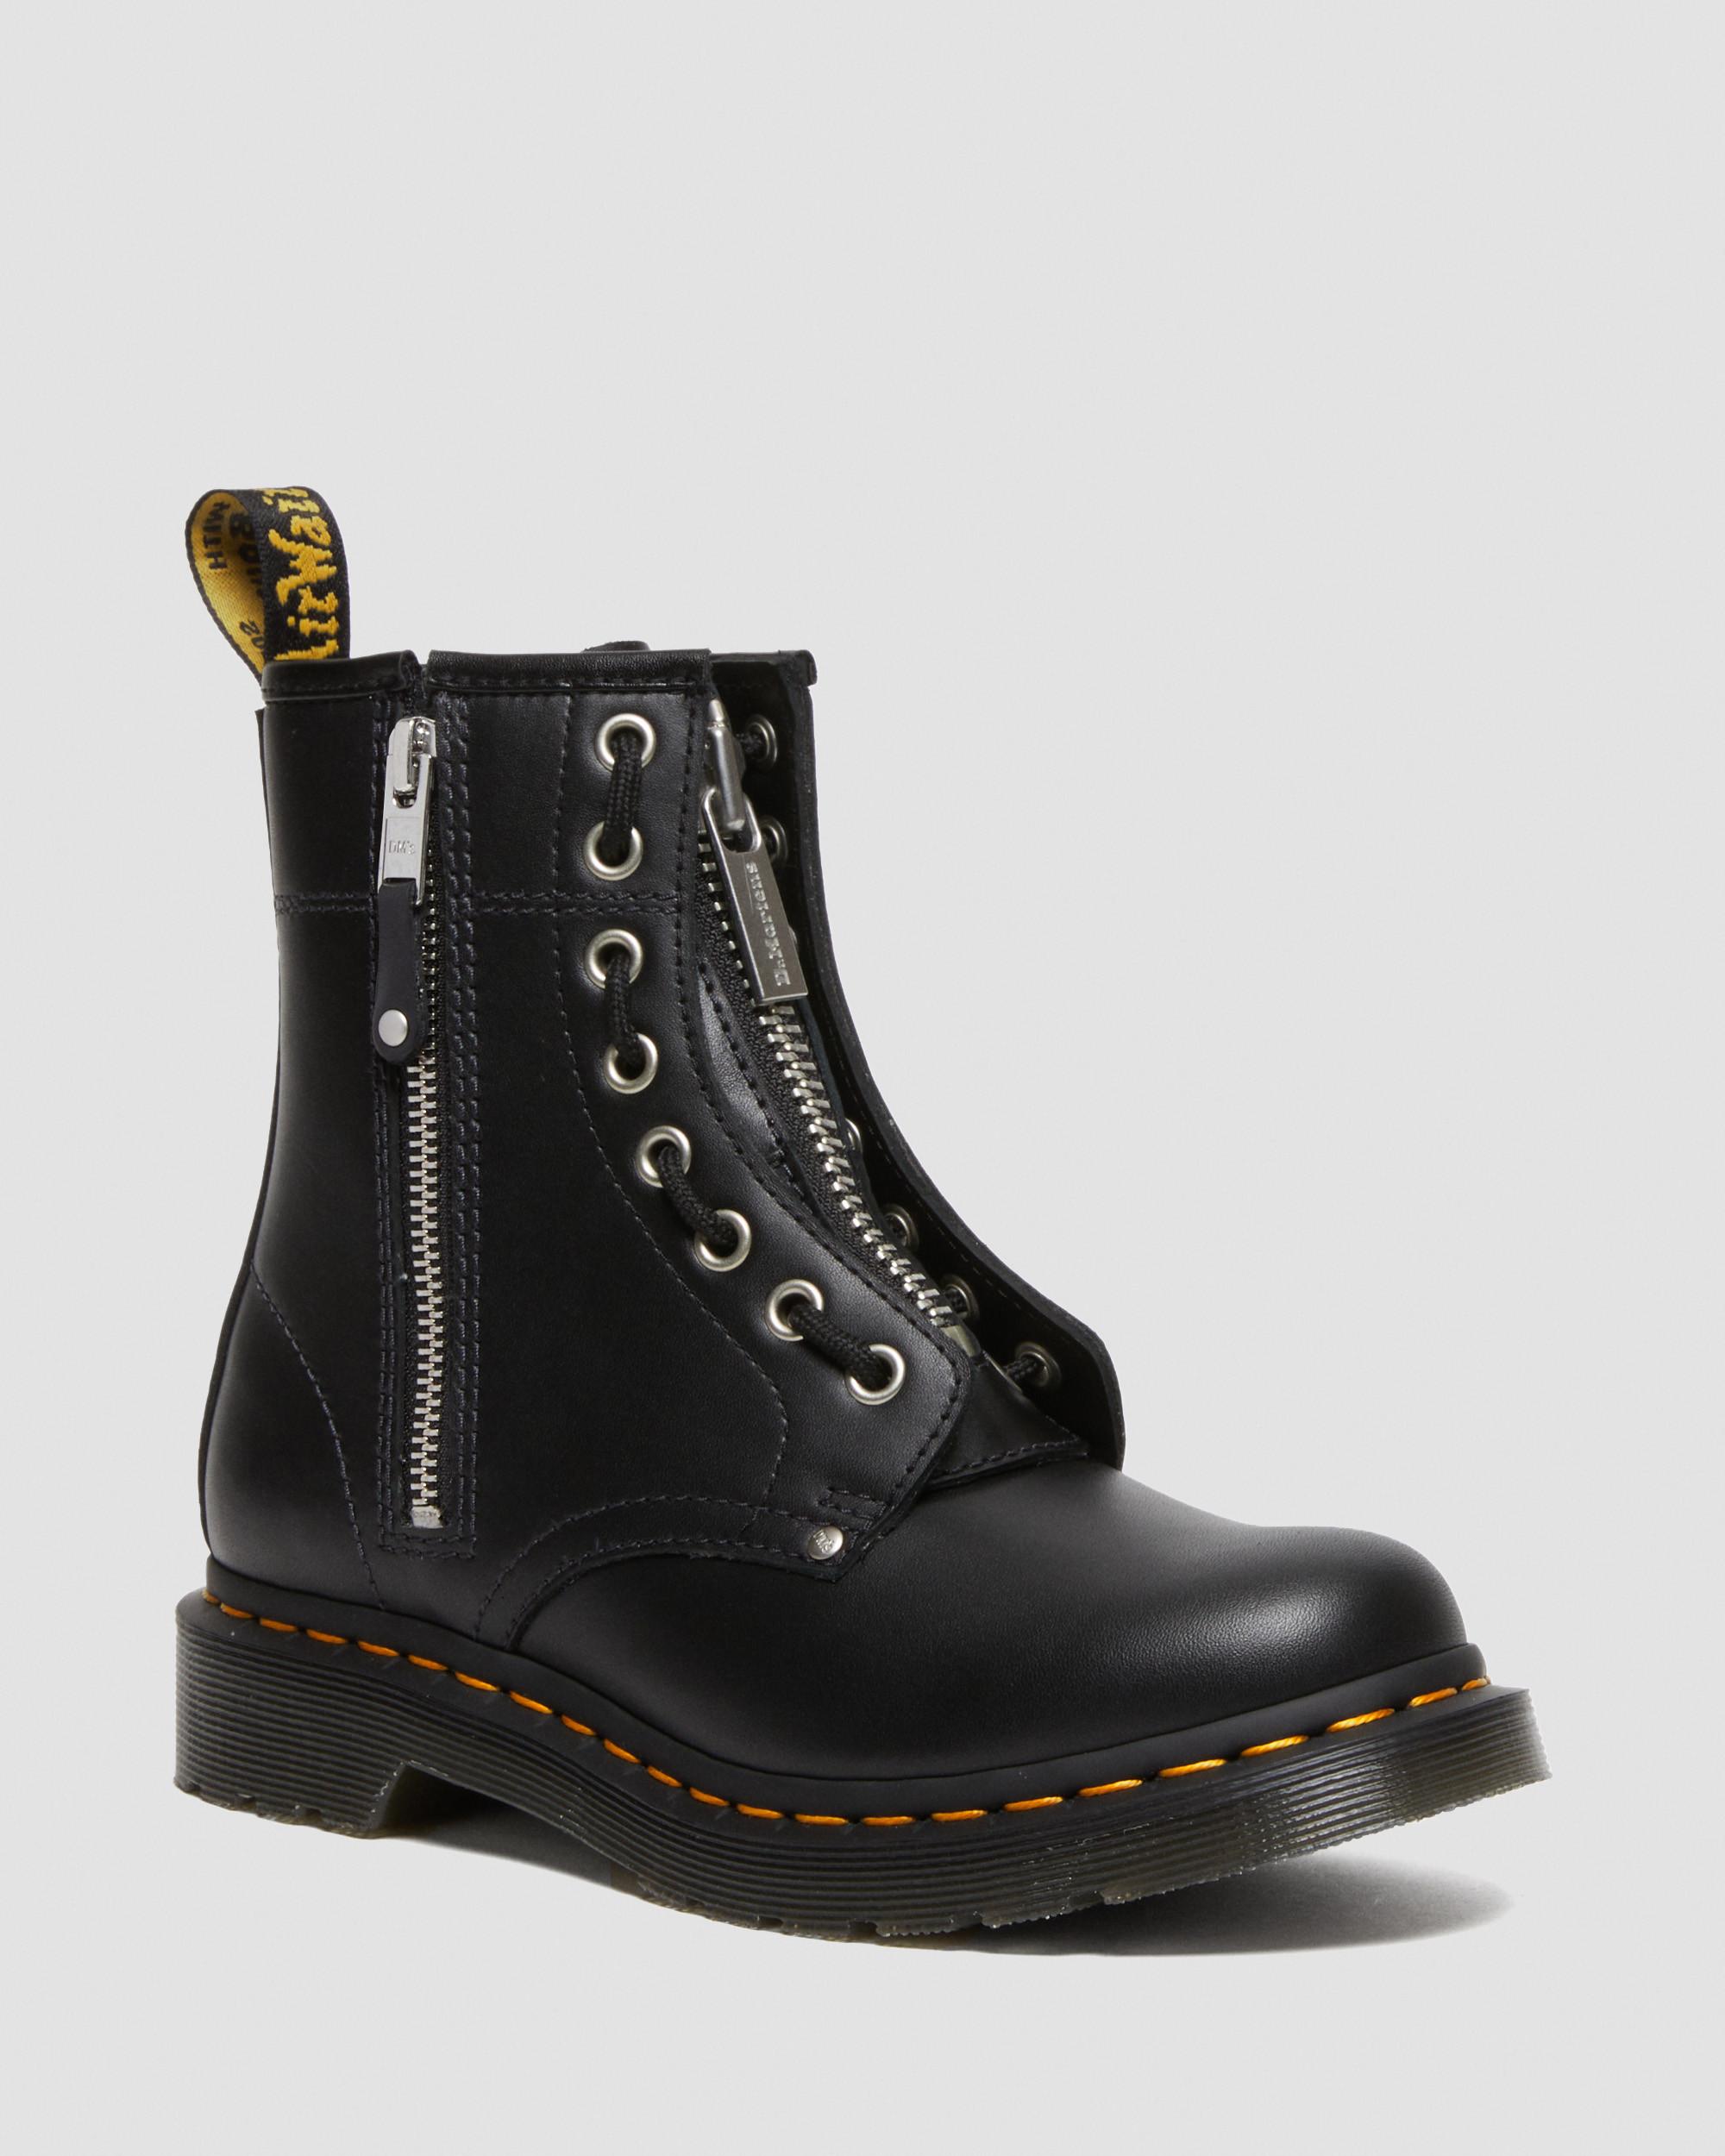 1460 Women's Double Zip Leather Lace Up Boots in Black | Dr. Martens